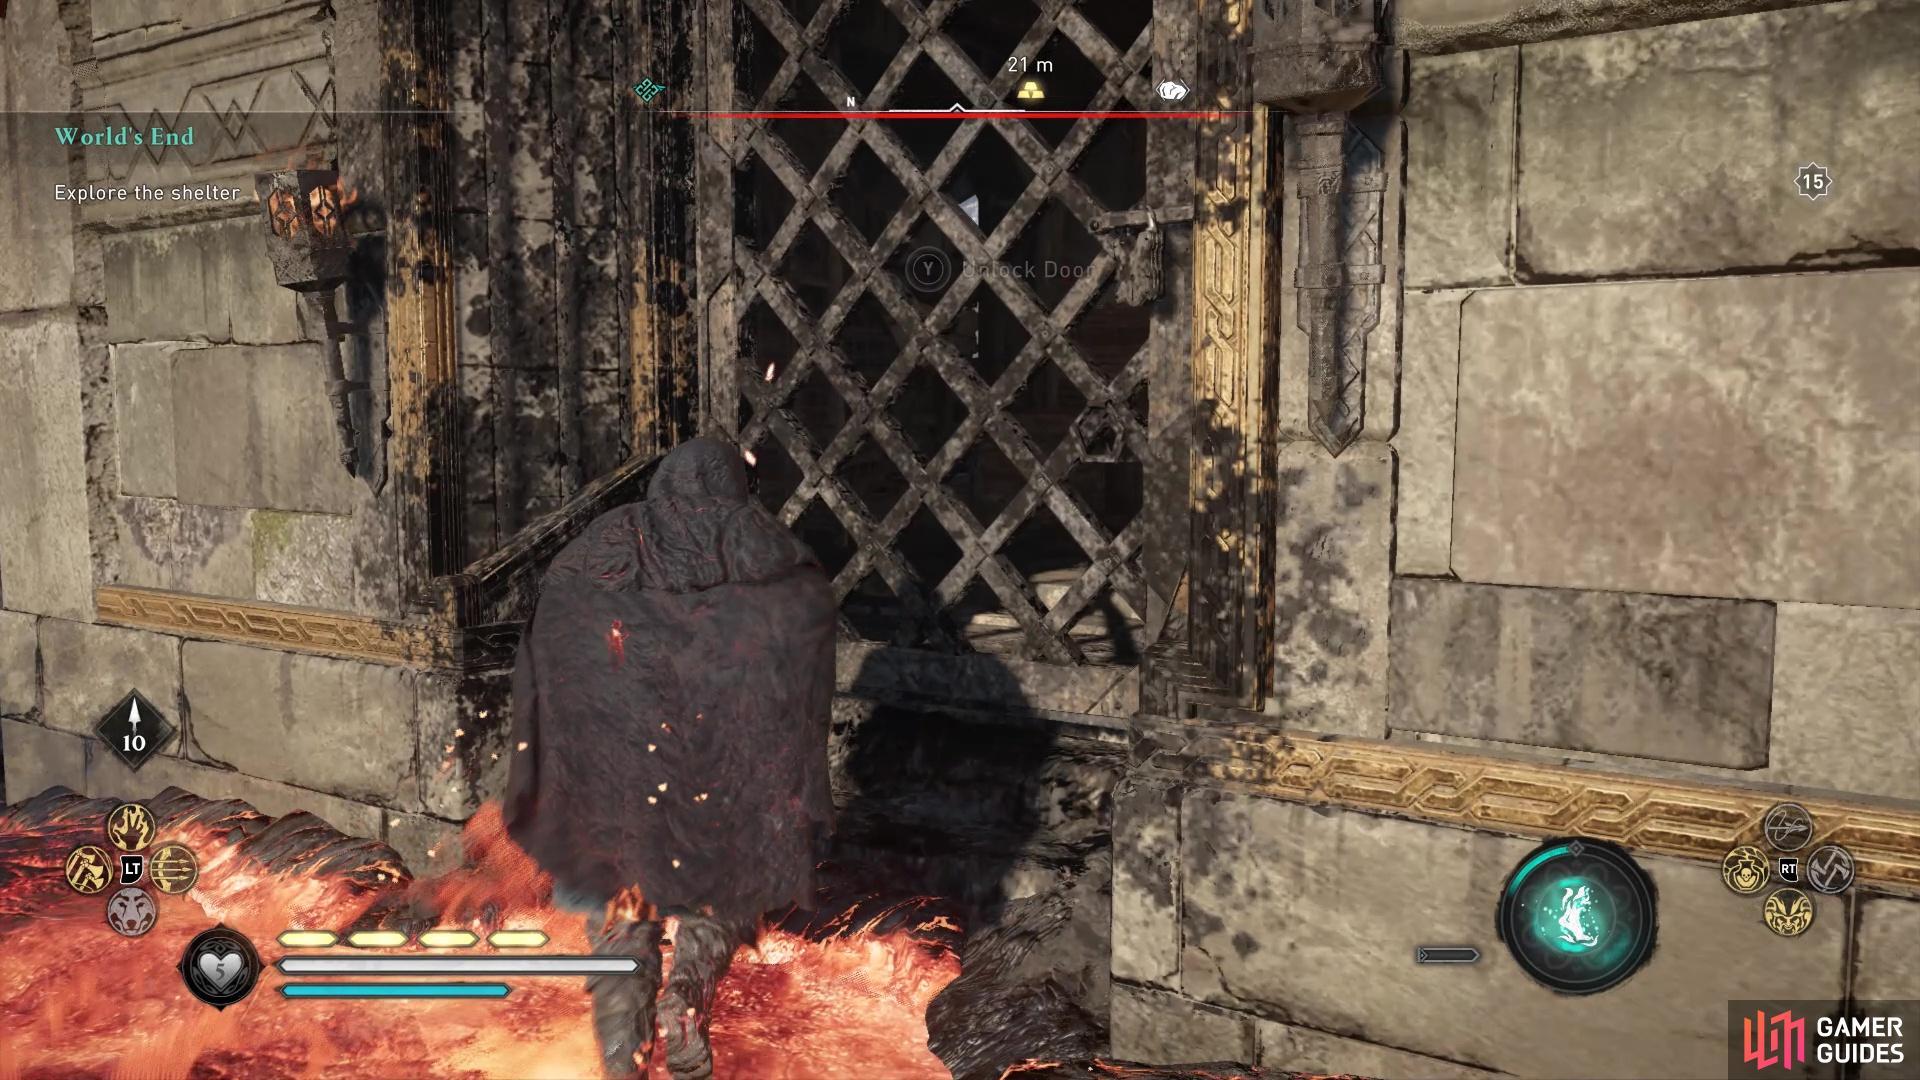 Then use the Power of Muspelheim to unlock to the door without being burned.